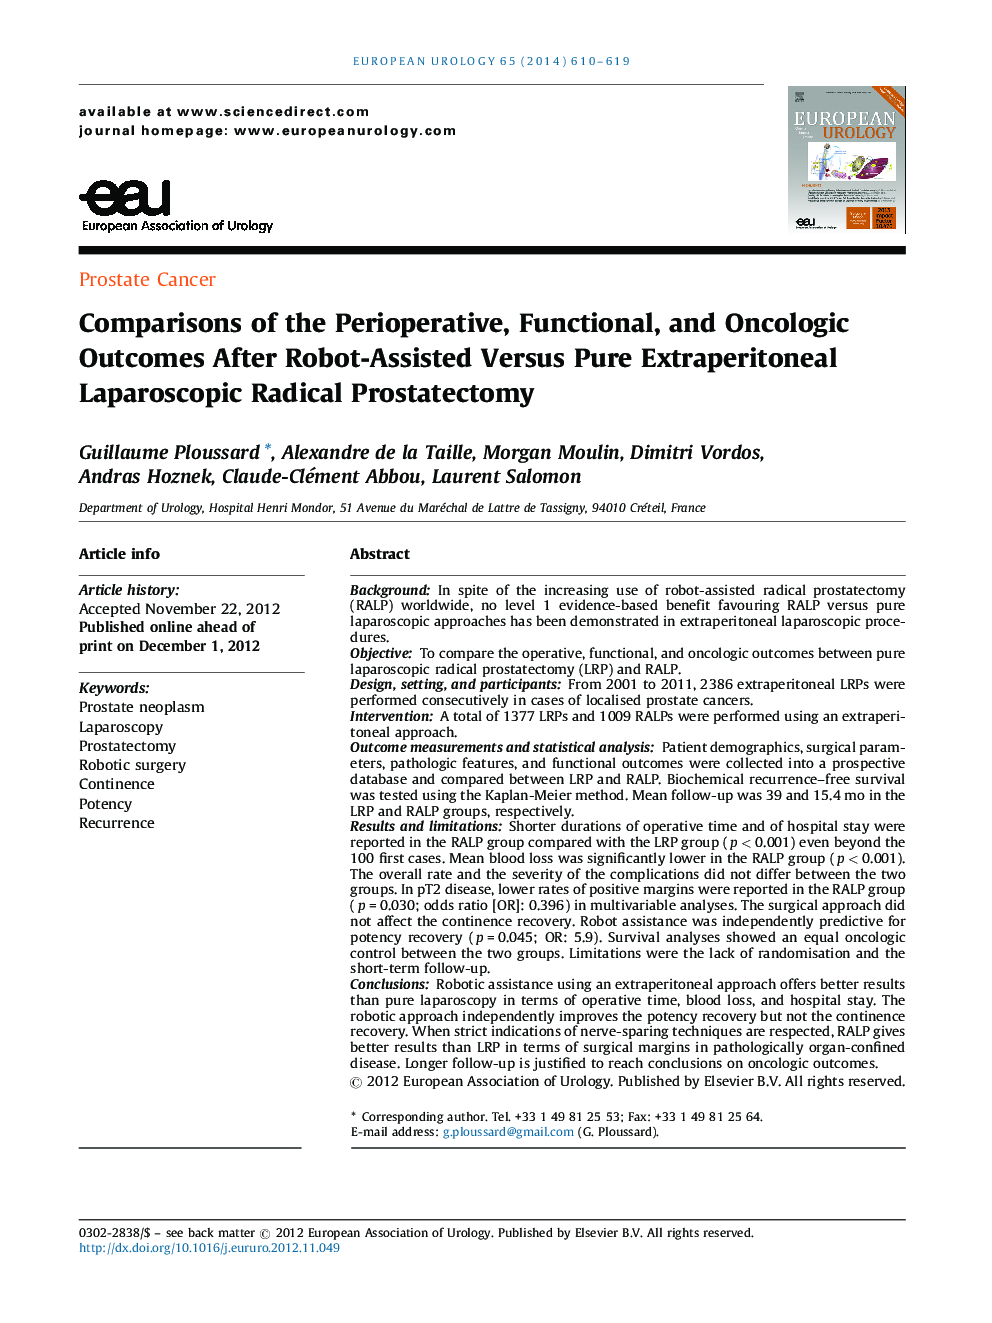 Comparisons of the Perioperative, Functional, and Oncologic Outcomes After Robot-Assisted Versus Pure Extraperitoneal Laparoscopic Radical Prostatectomy